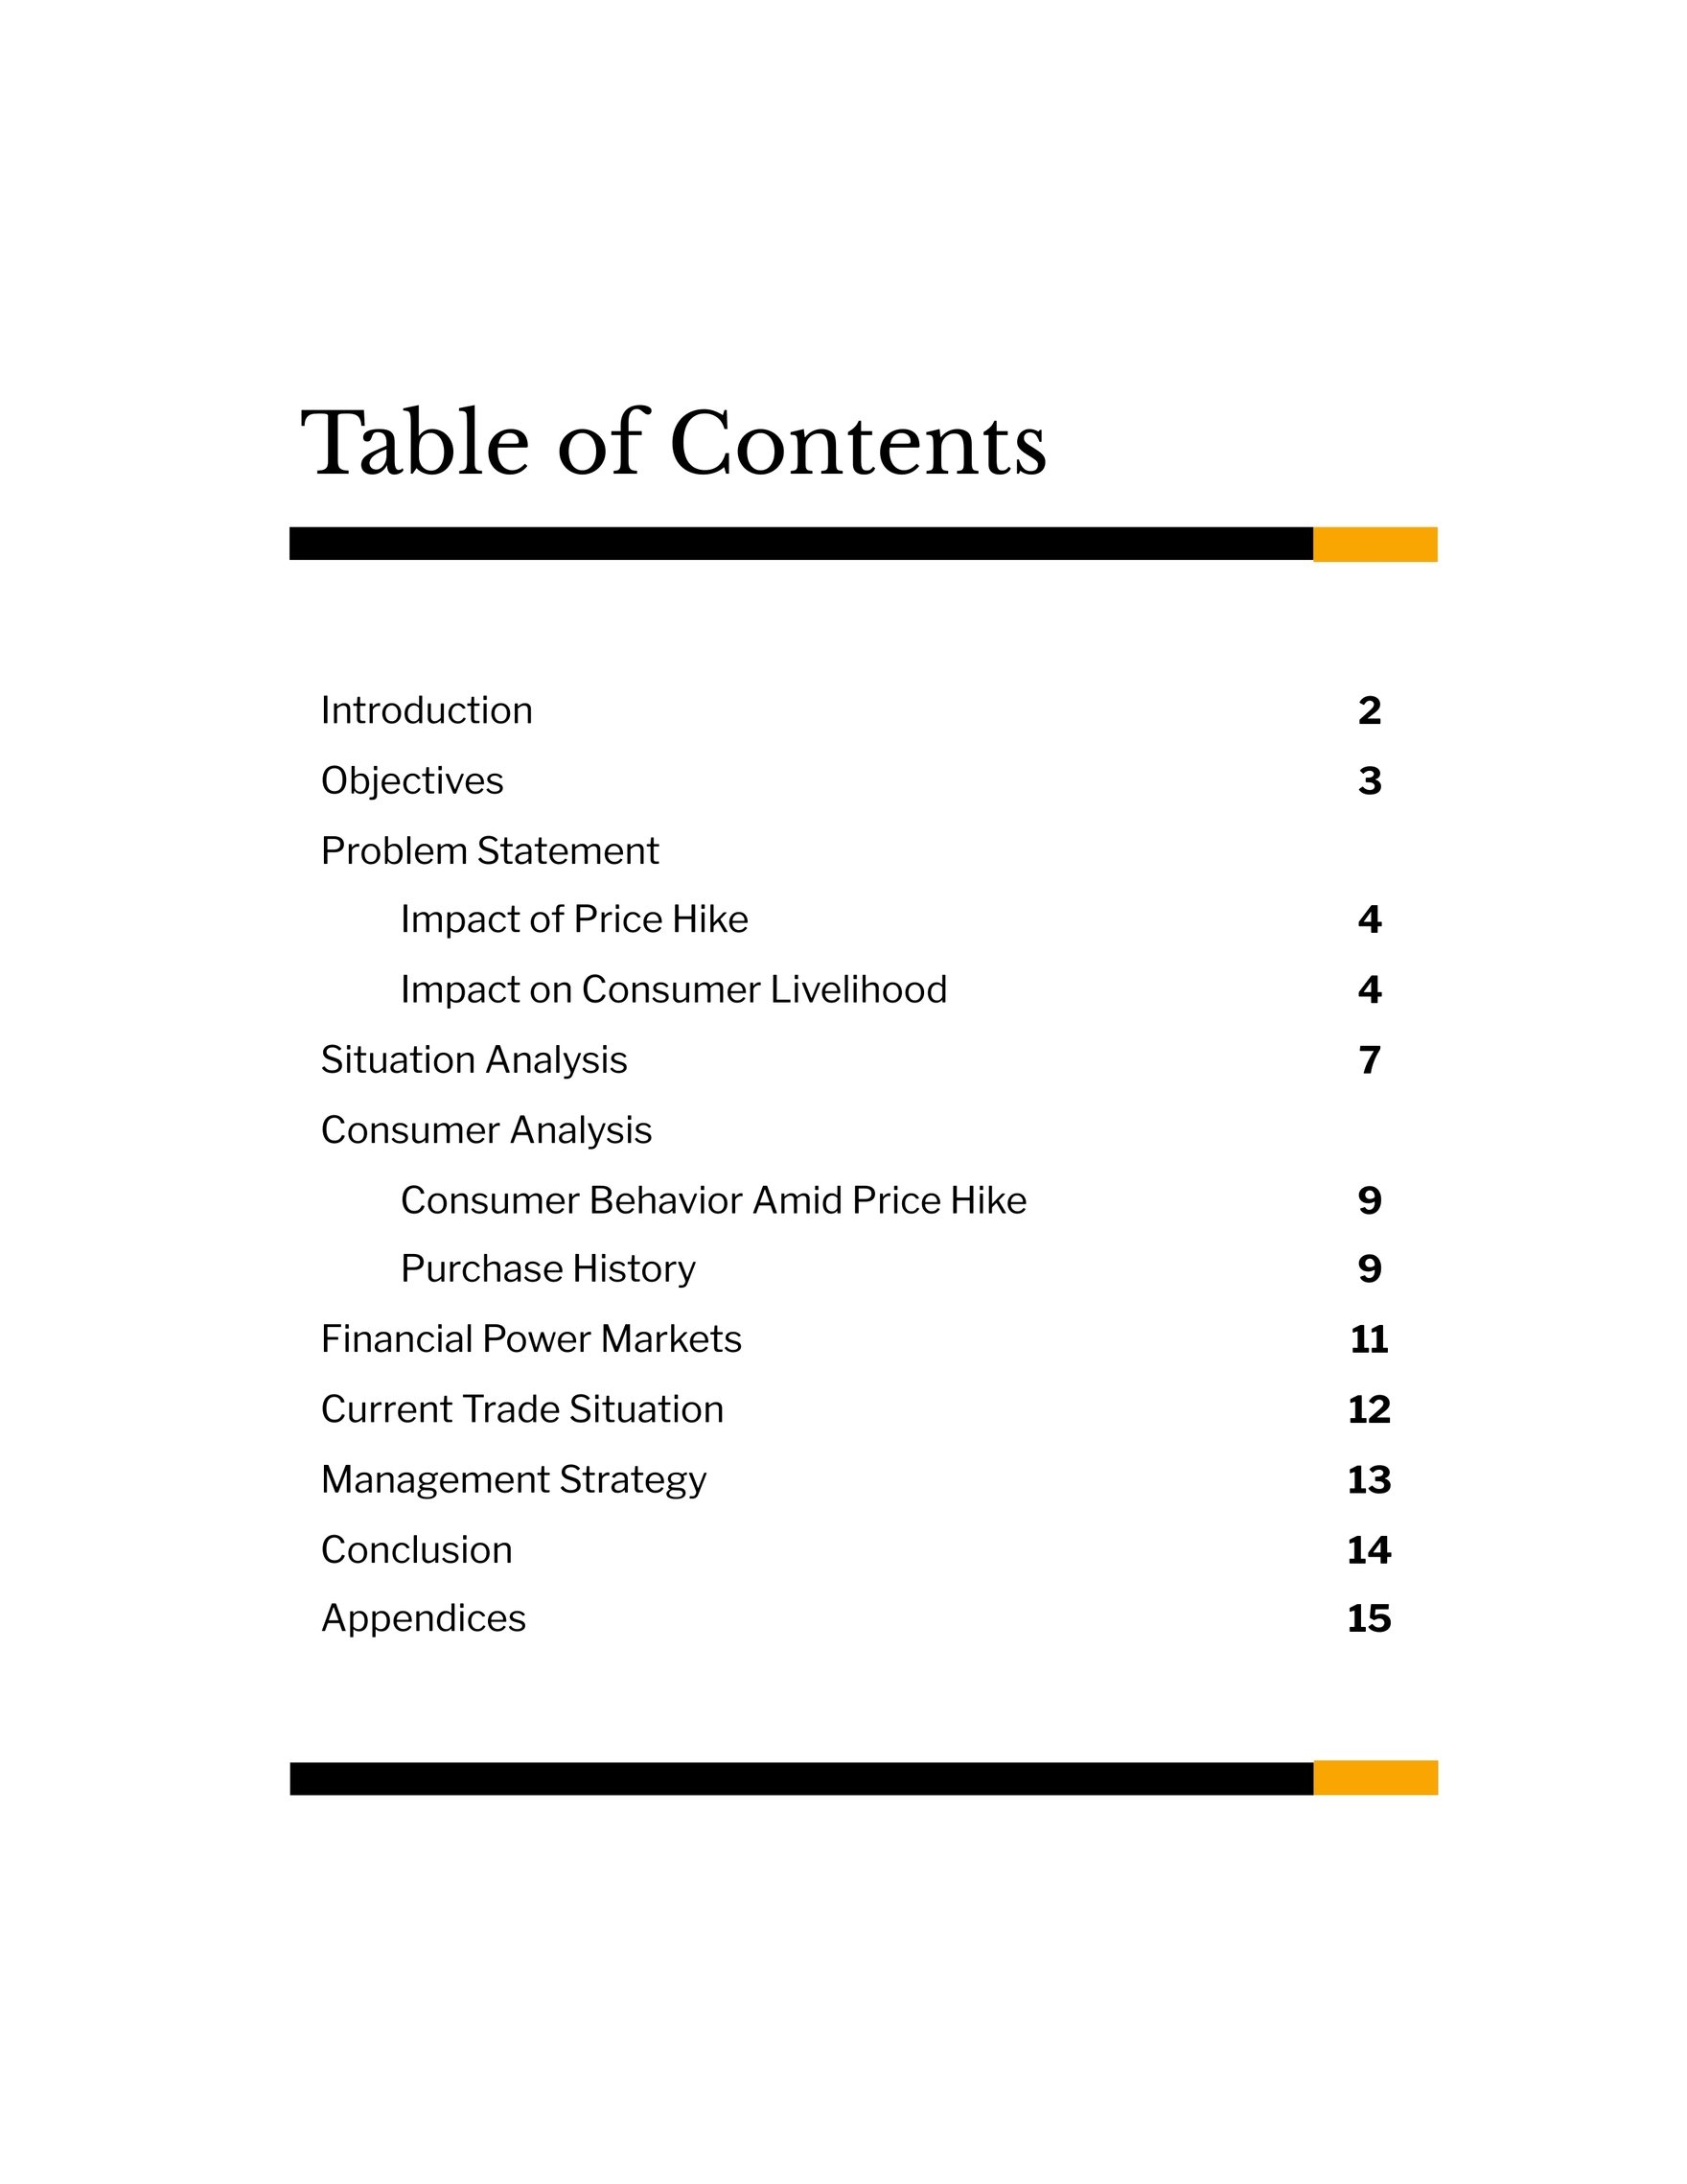 Table of Contents For White Papers